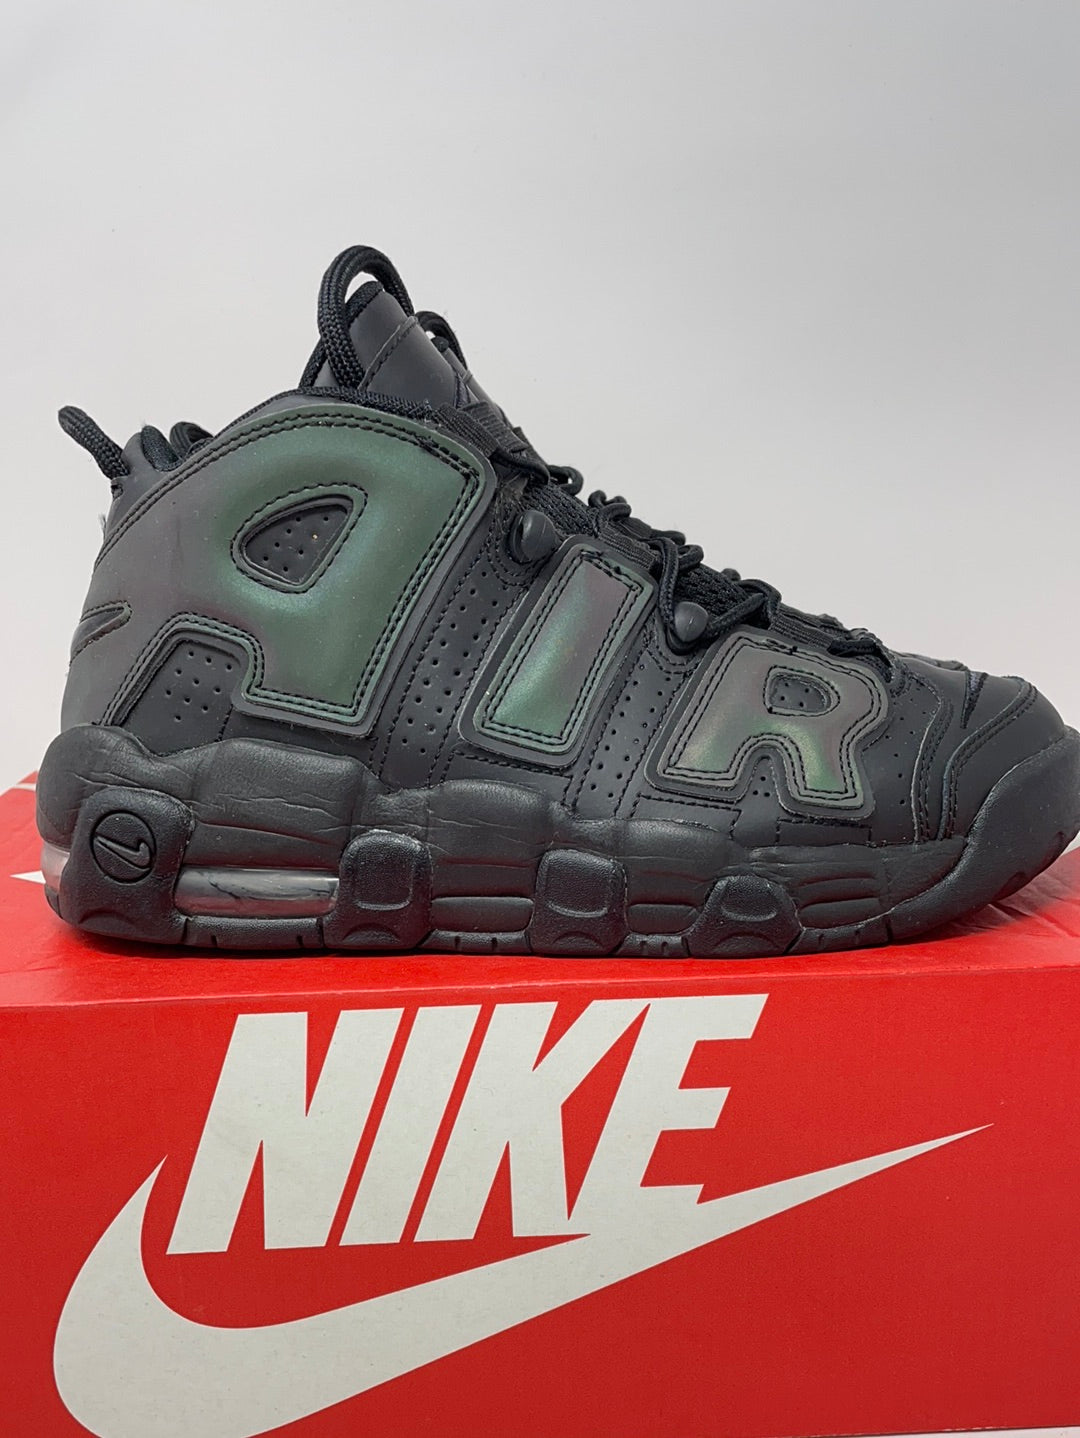 Used Air More Uptempo GS “Reflective” Sz 6.5y